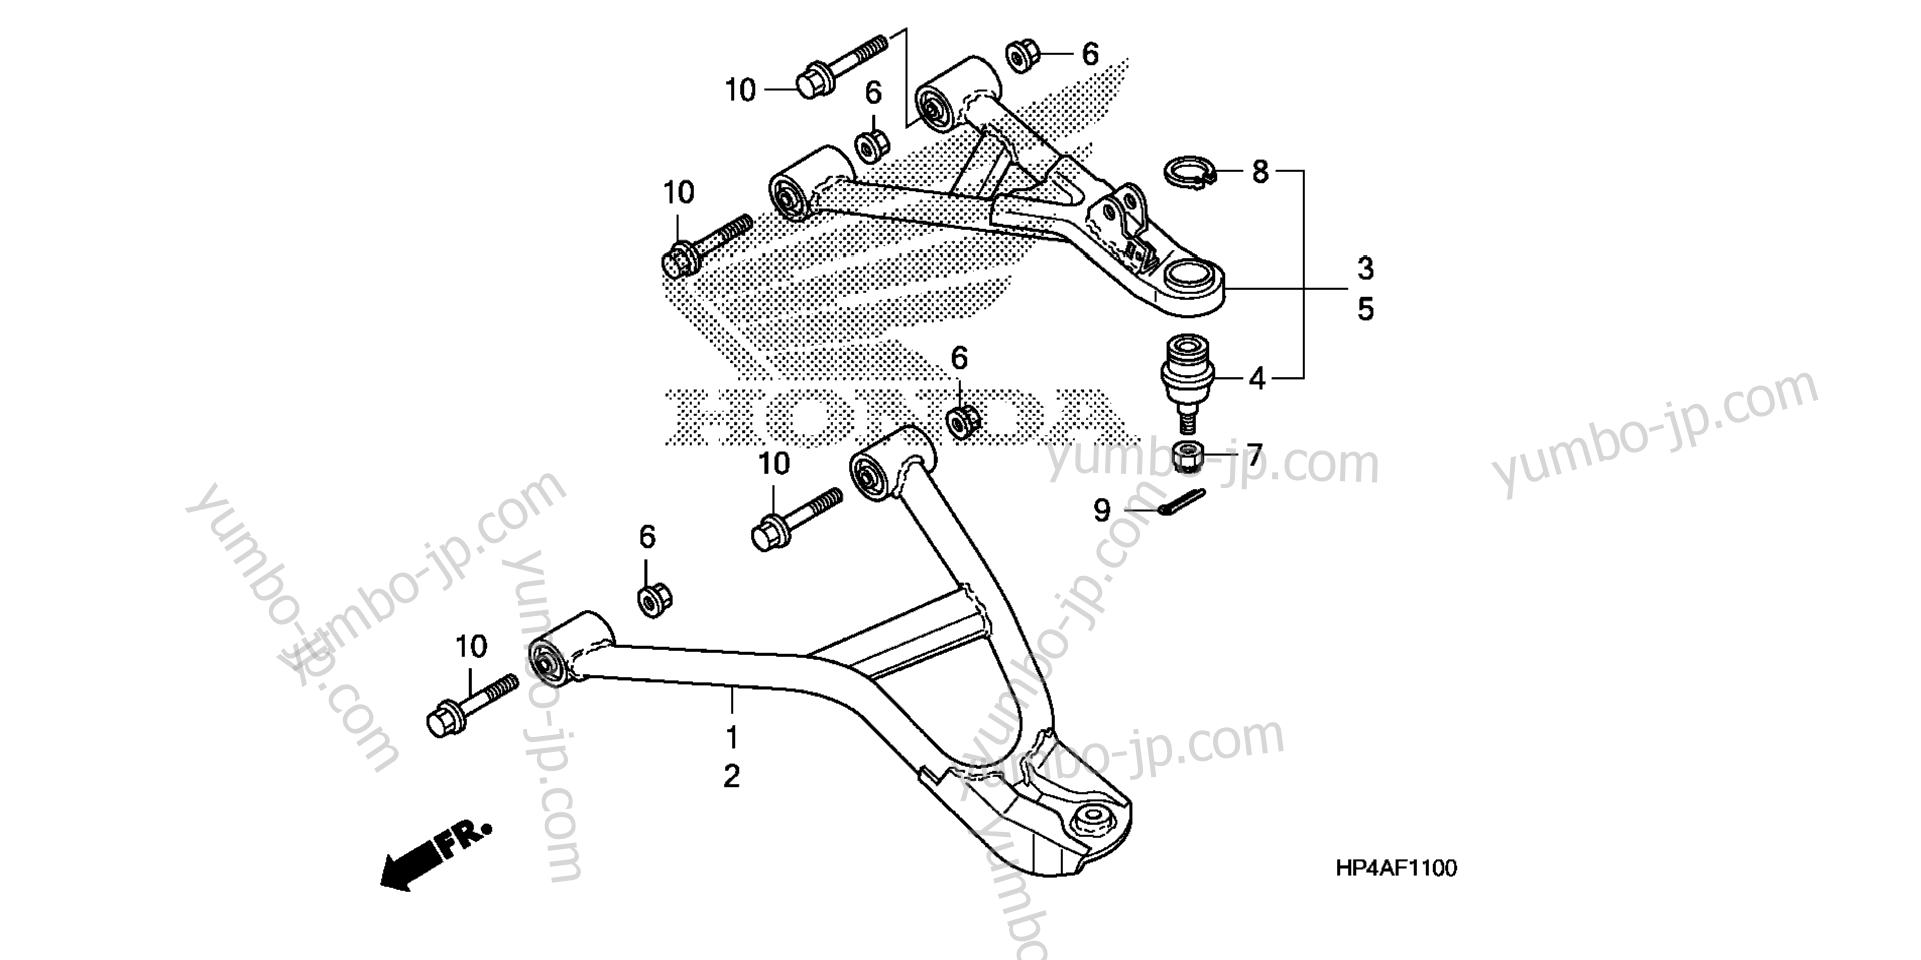 FRONT ARM (2WD) for ATVs HONDA TRX420TE A 2010 year